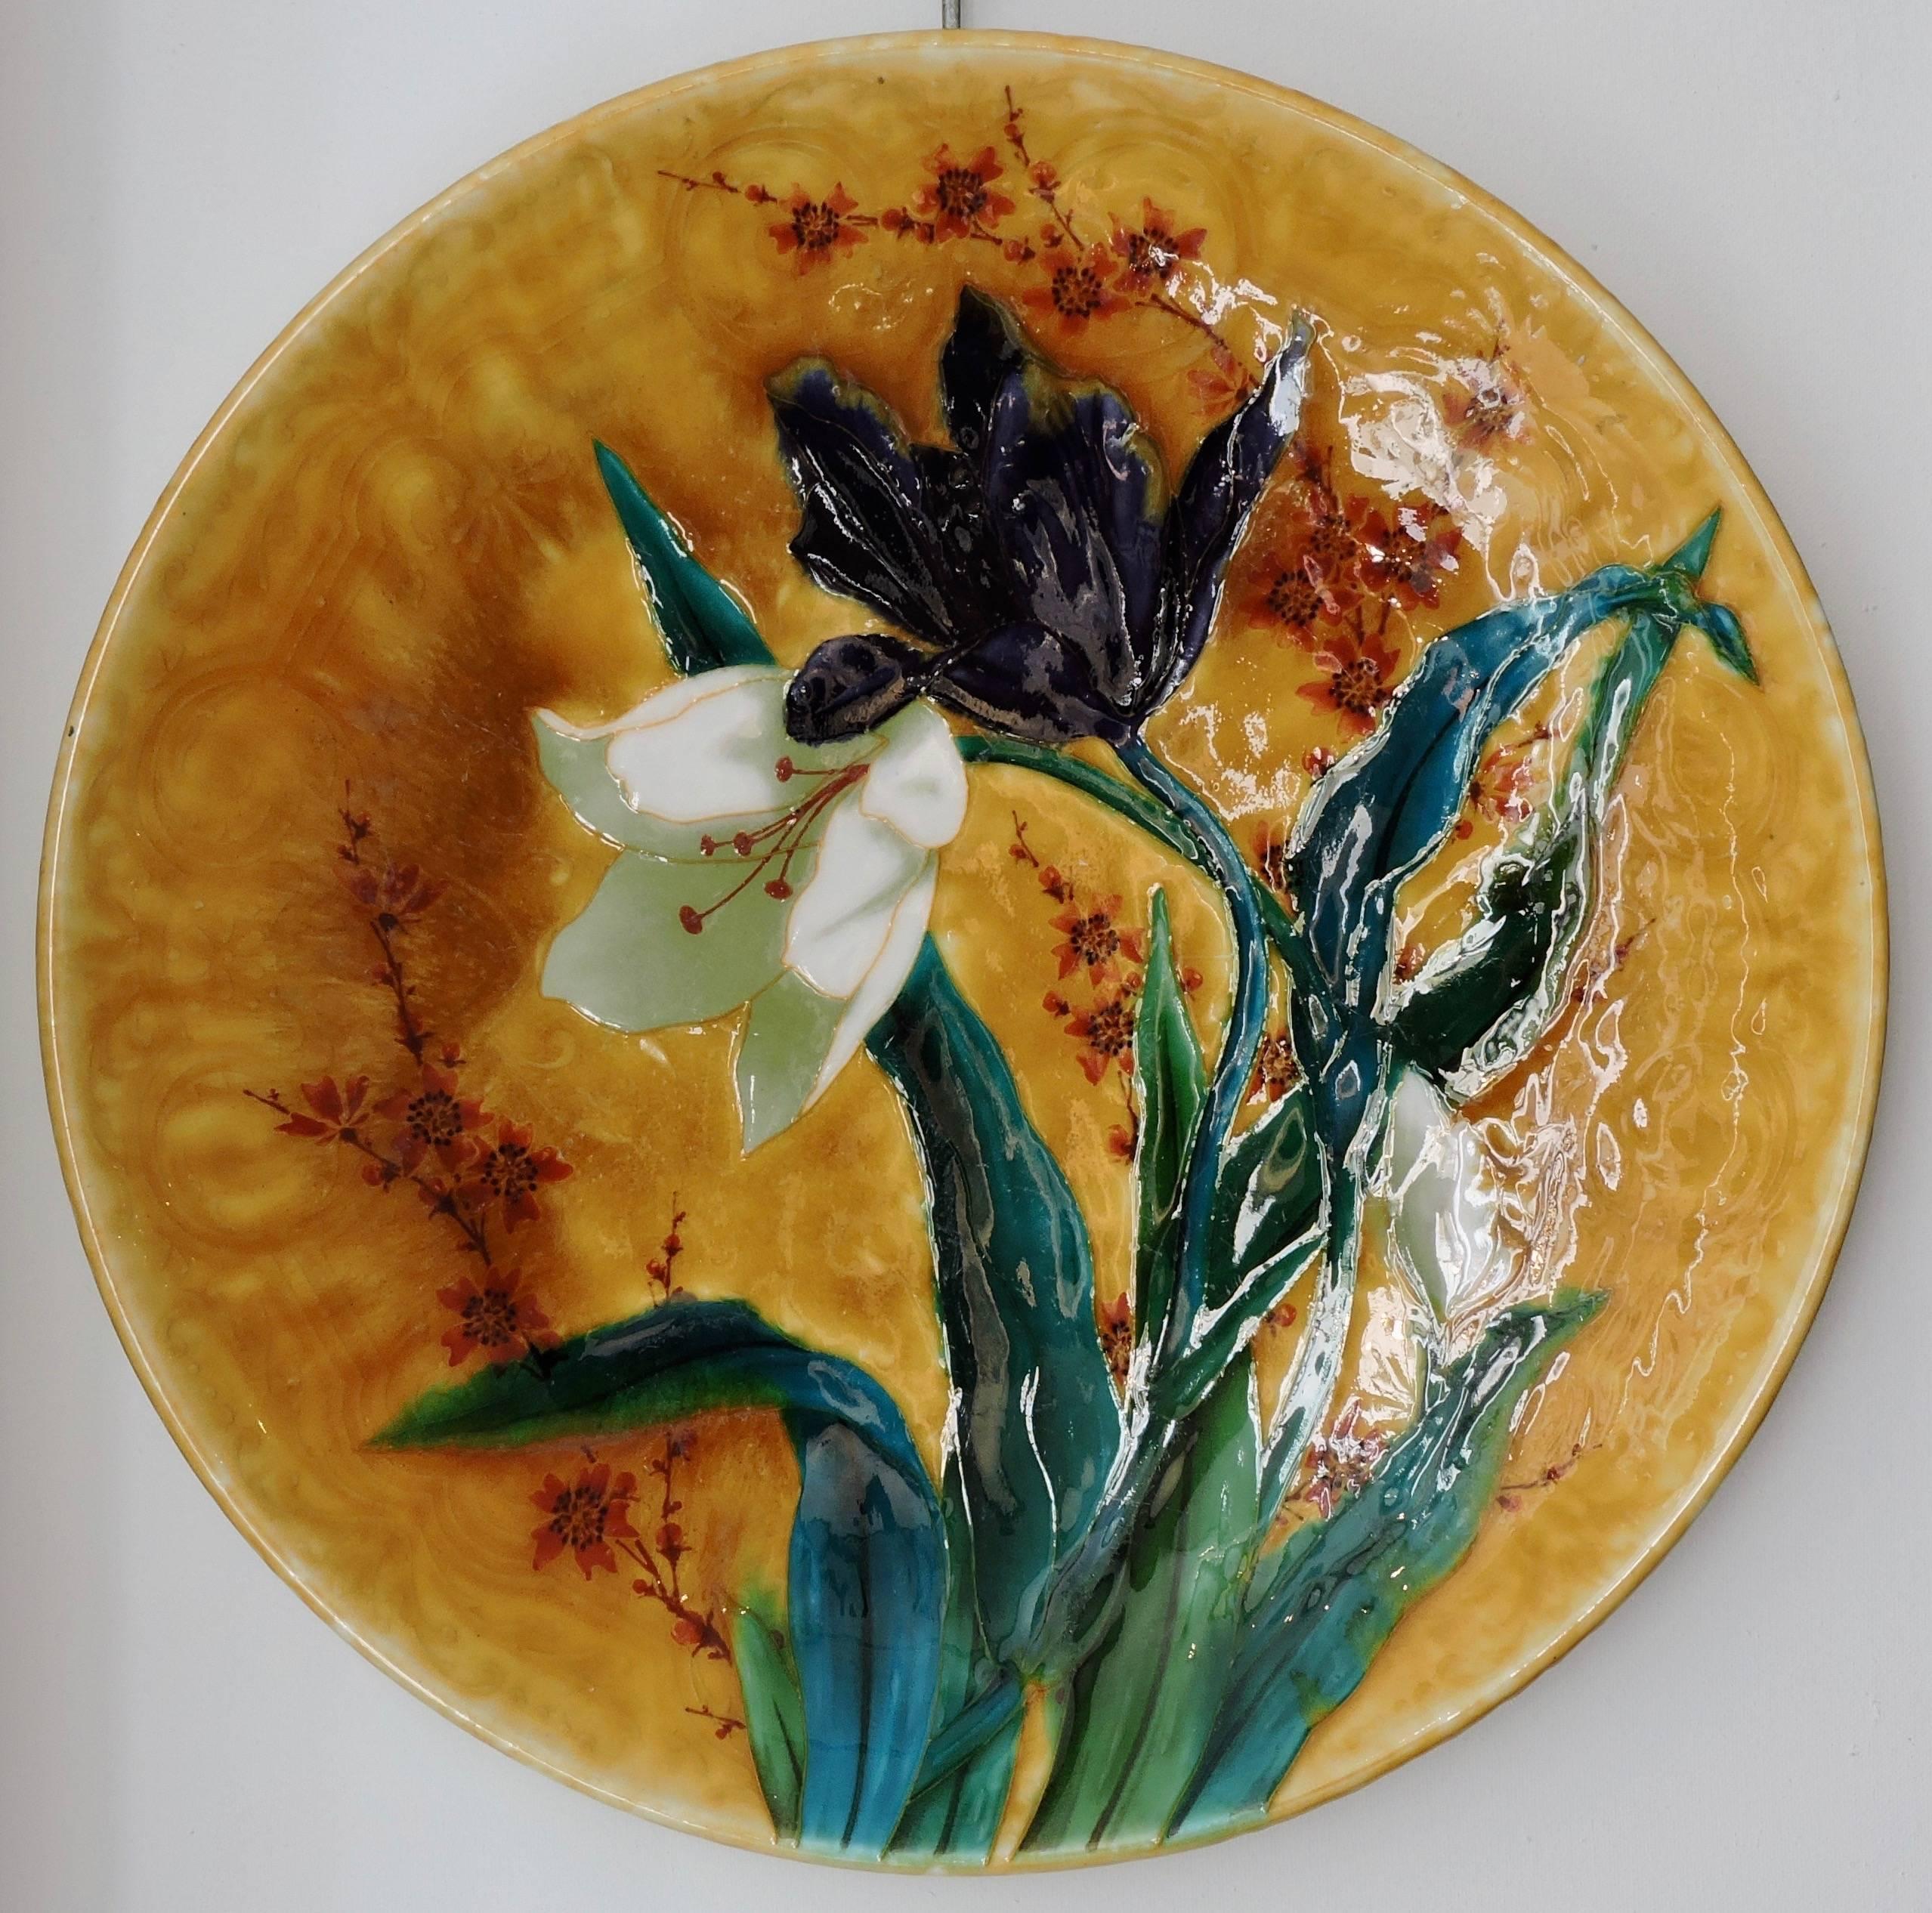 A Large Théodore deck circular enamelled faience platter with polychrome design of tulips on a yellow background.
Signed with TH. Deck and profile stamps
circa 1880-1890.